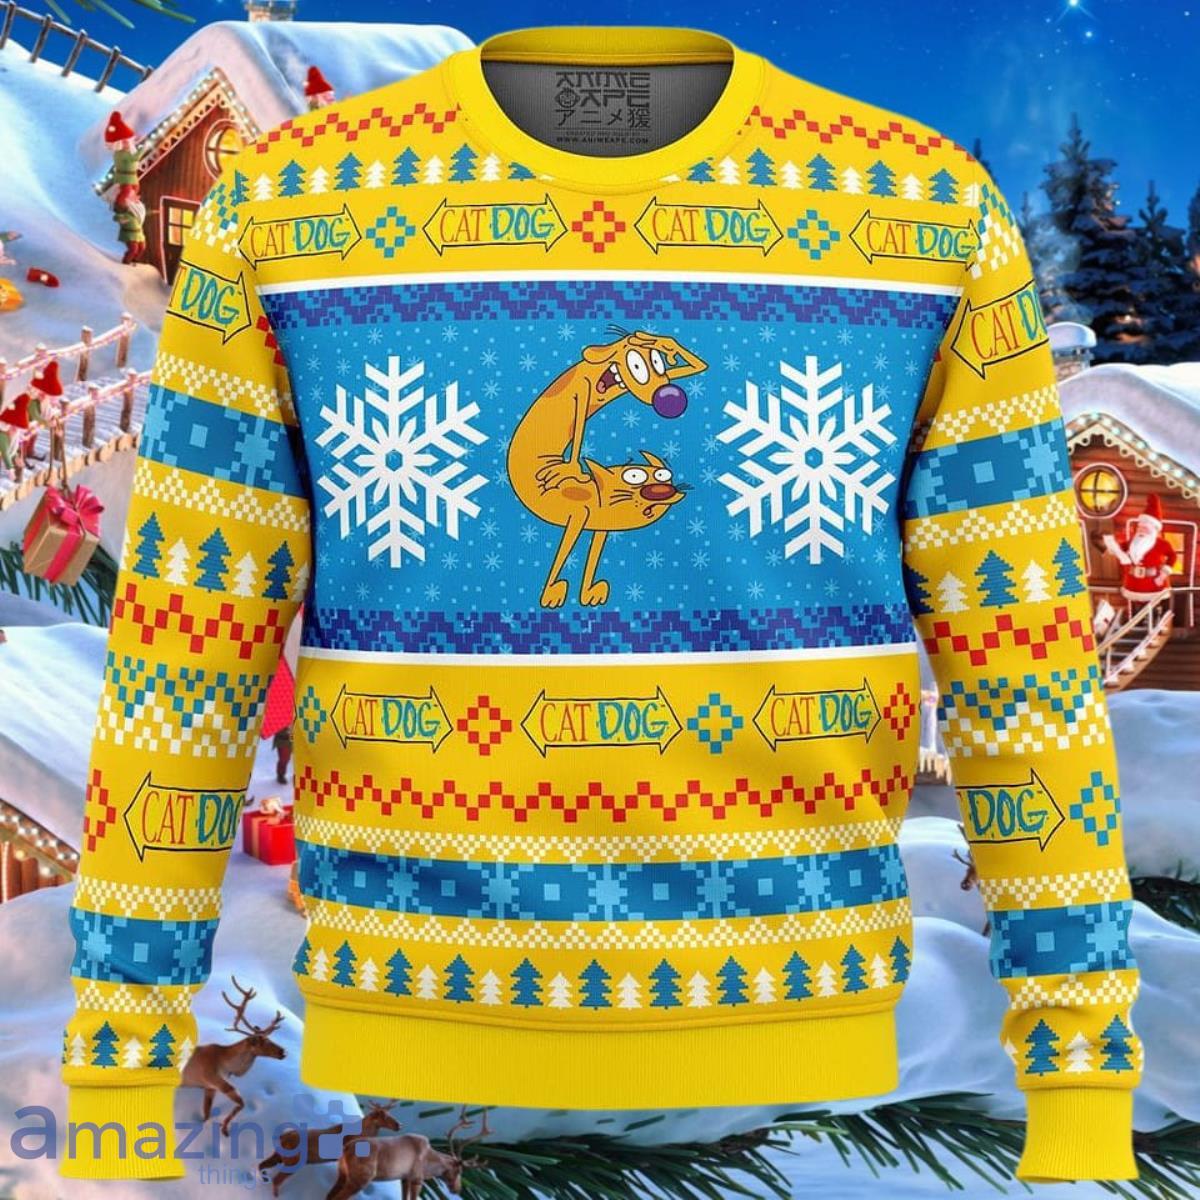 Louis Vuitton Ugly Sweater Gift Outfit For Men Women Type10